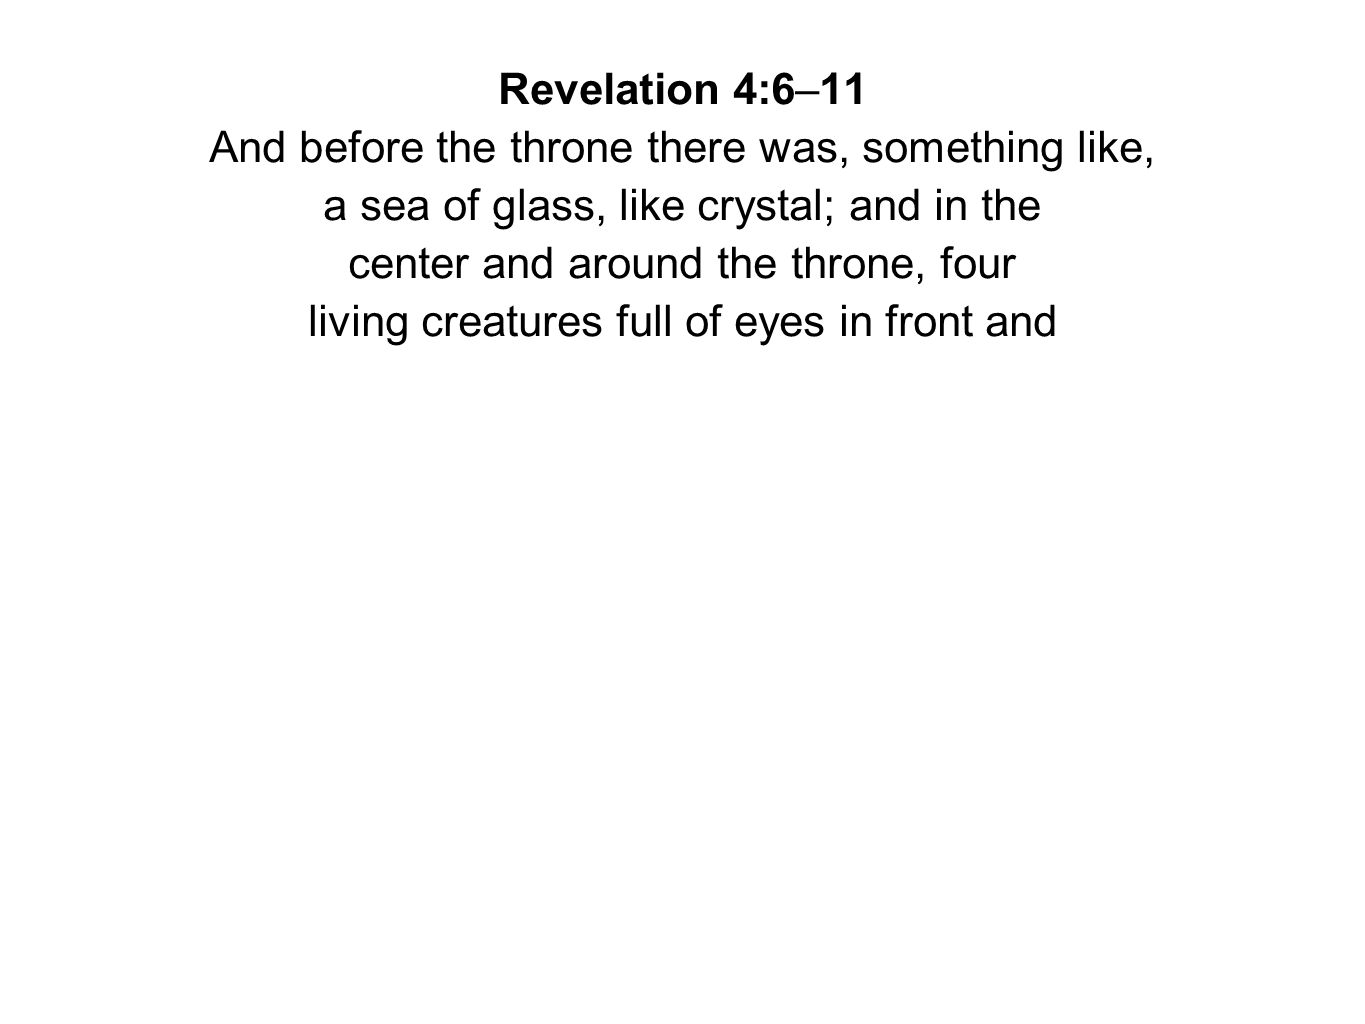 Revelation 4:6–11 And before the throne there was, something like, a sea of glass, like crystal; and in the center and around the throne, four living creatures full of eyes in front and